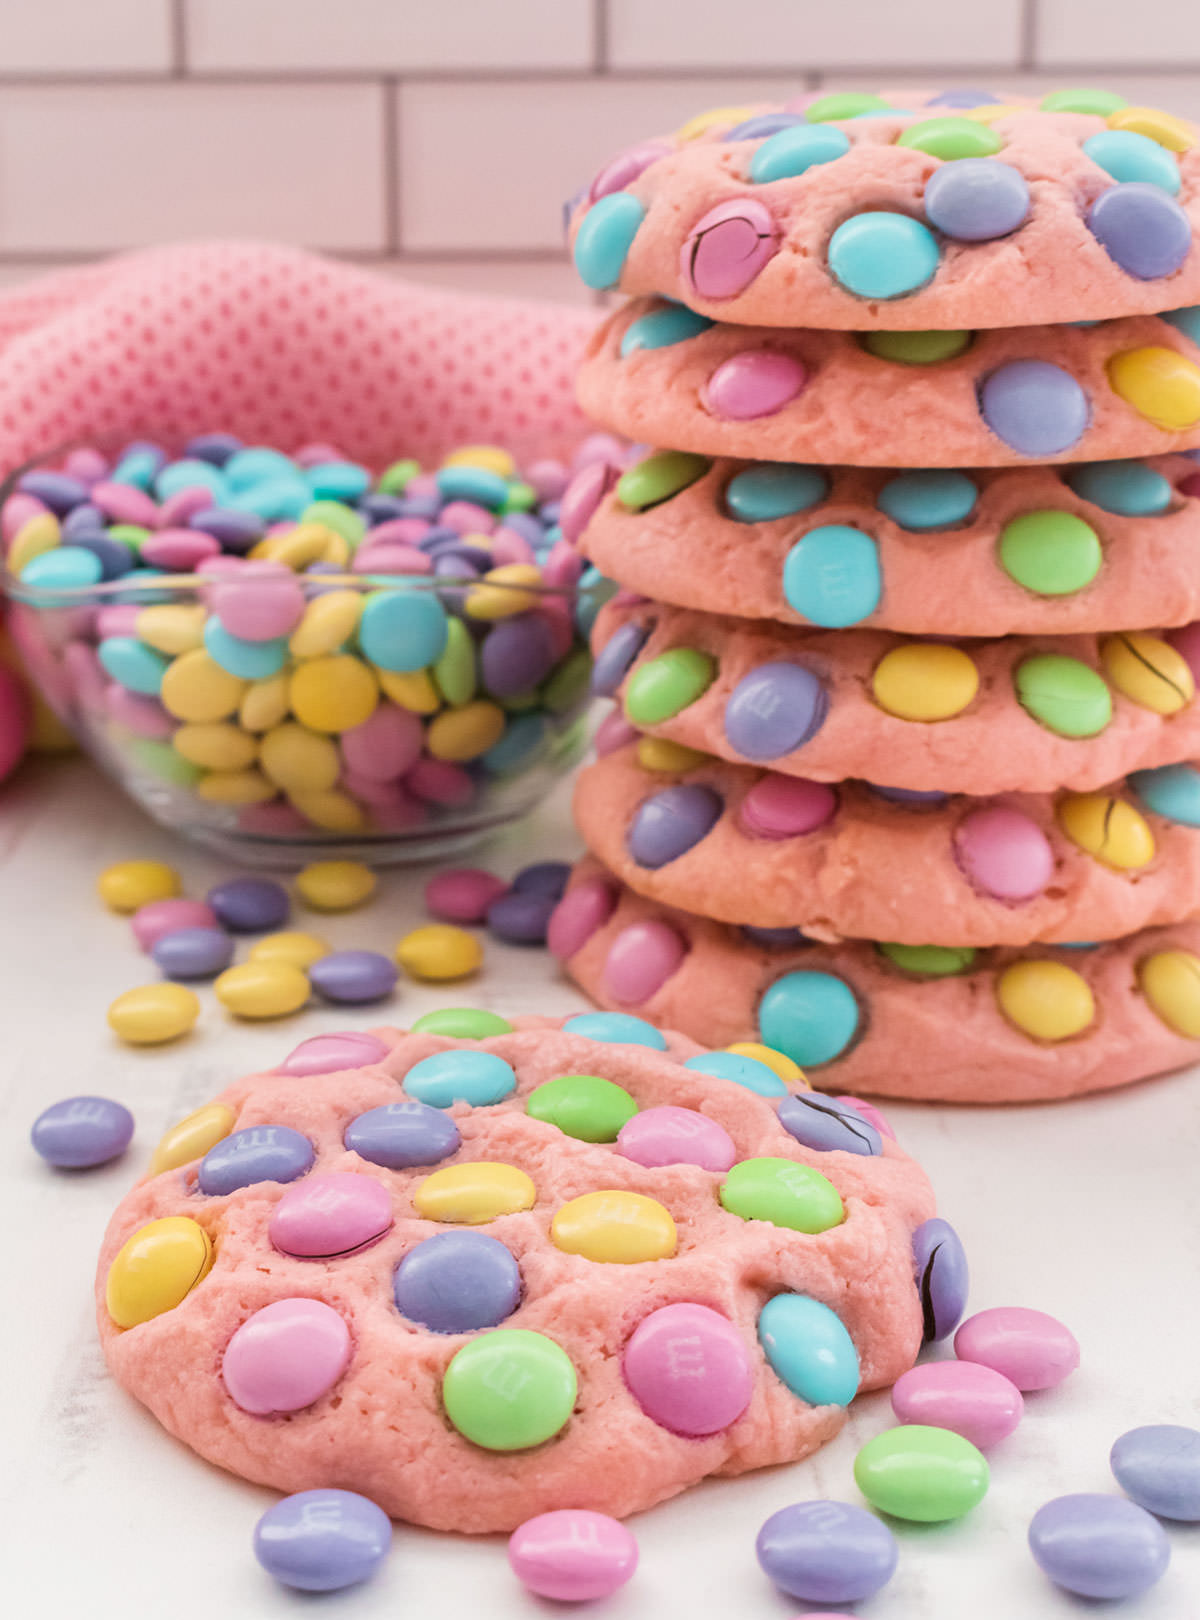 Closeup on an Easter M&M Sugar Cookie sitting on a white surface in front of a larger stack of cookies and a glass bowl filled with pastel M&M's.